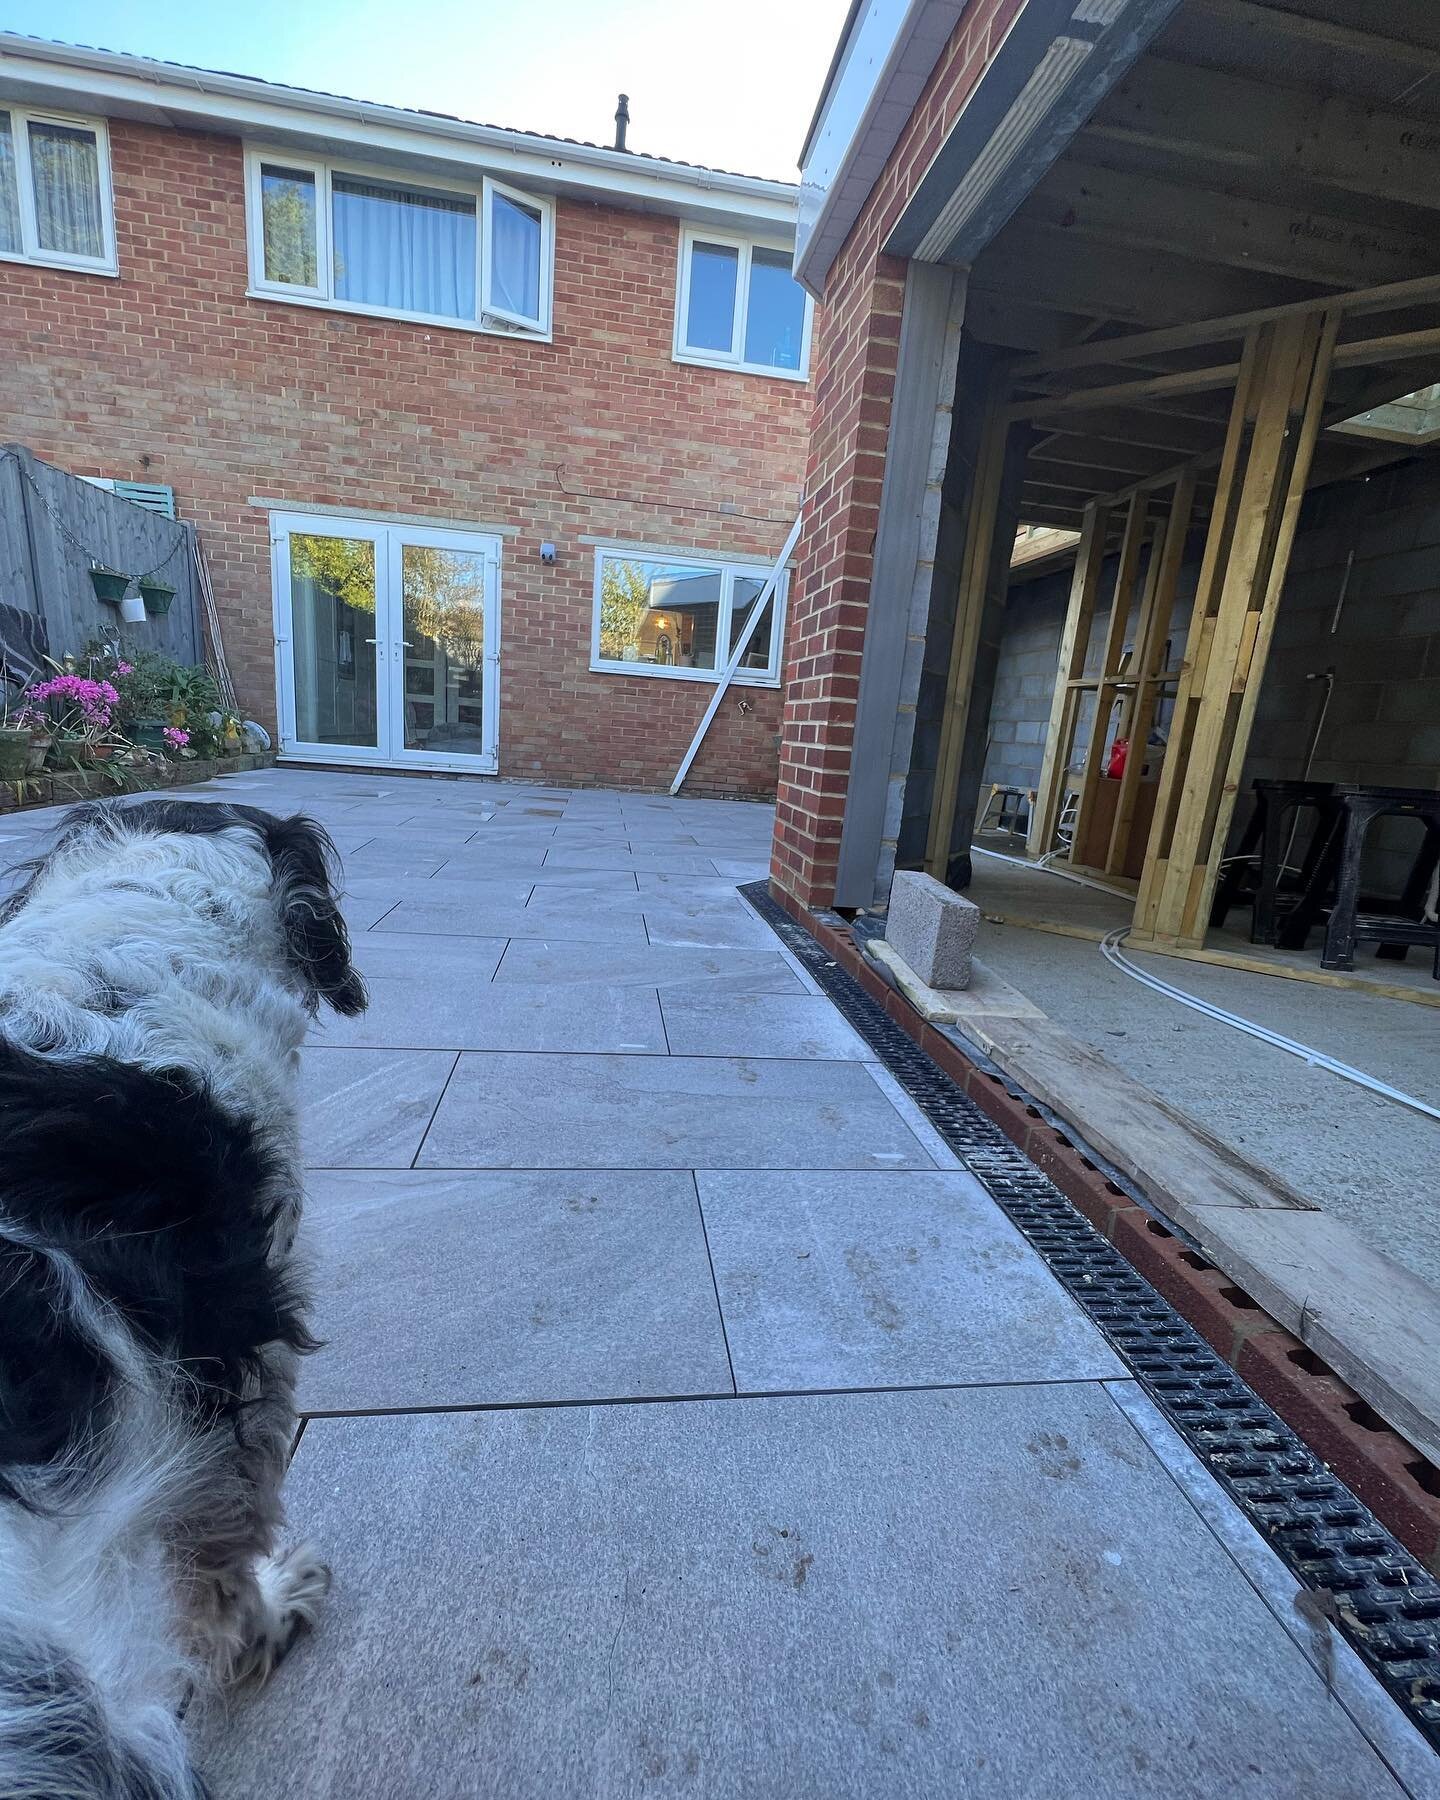 Someone inspected our patio and extension work over the weekend, porcelain slabs went down last week with grout completed this morning 
While the extension, we are waiting for plumbing and electrician to install . #inspiration #extensions #learning #